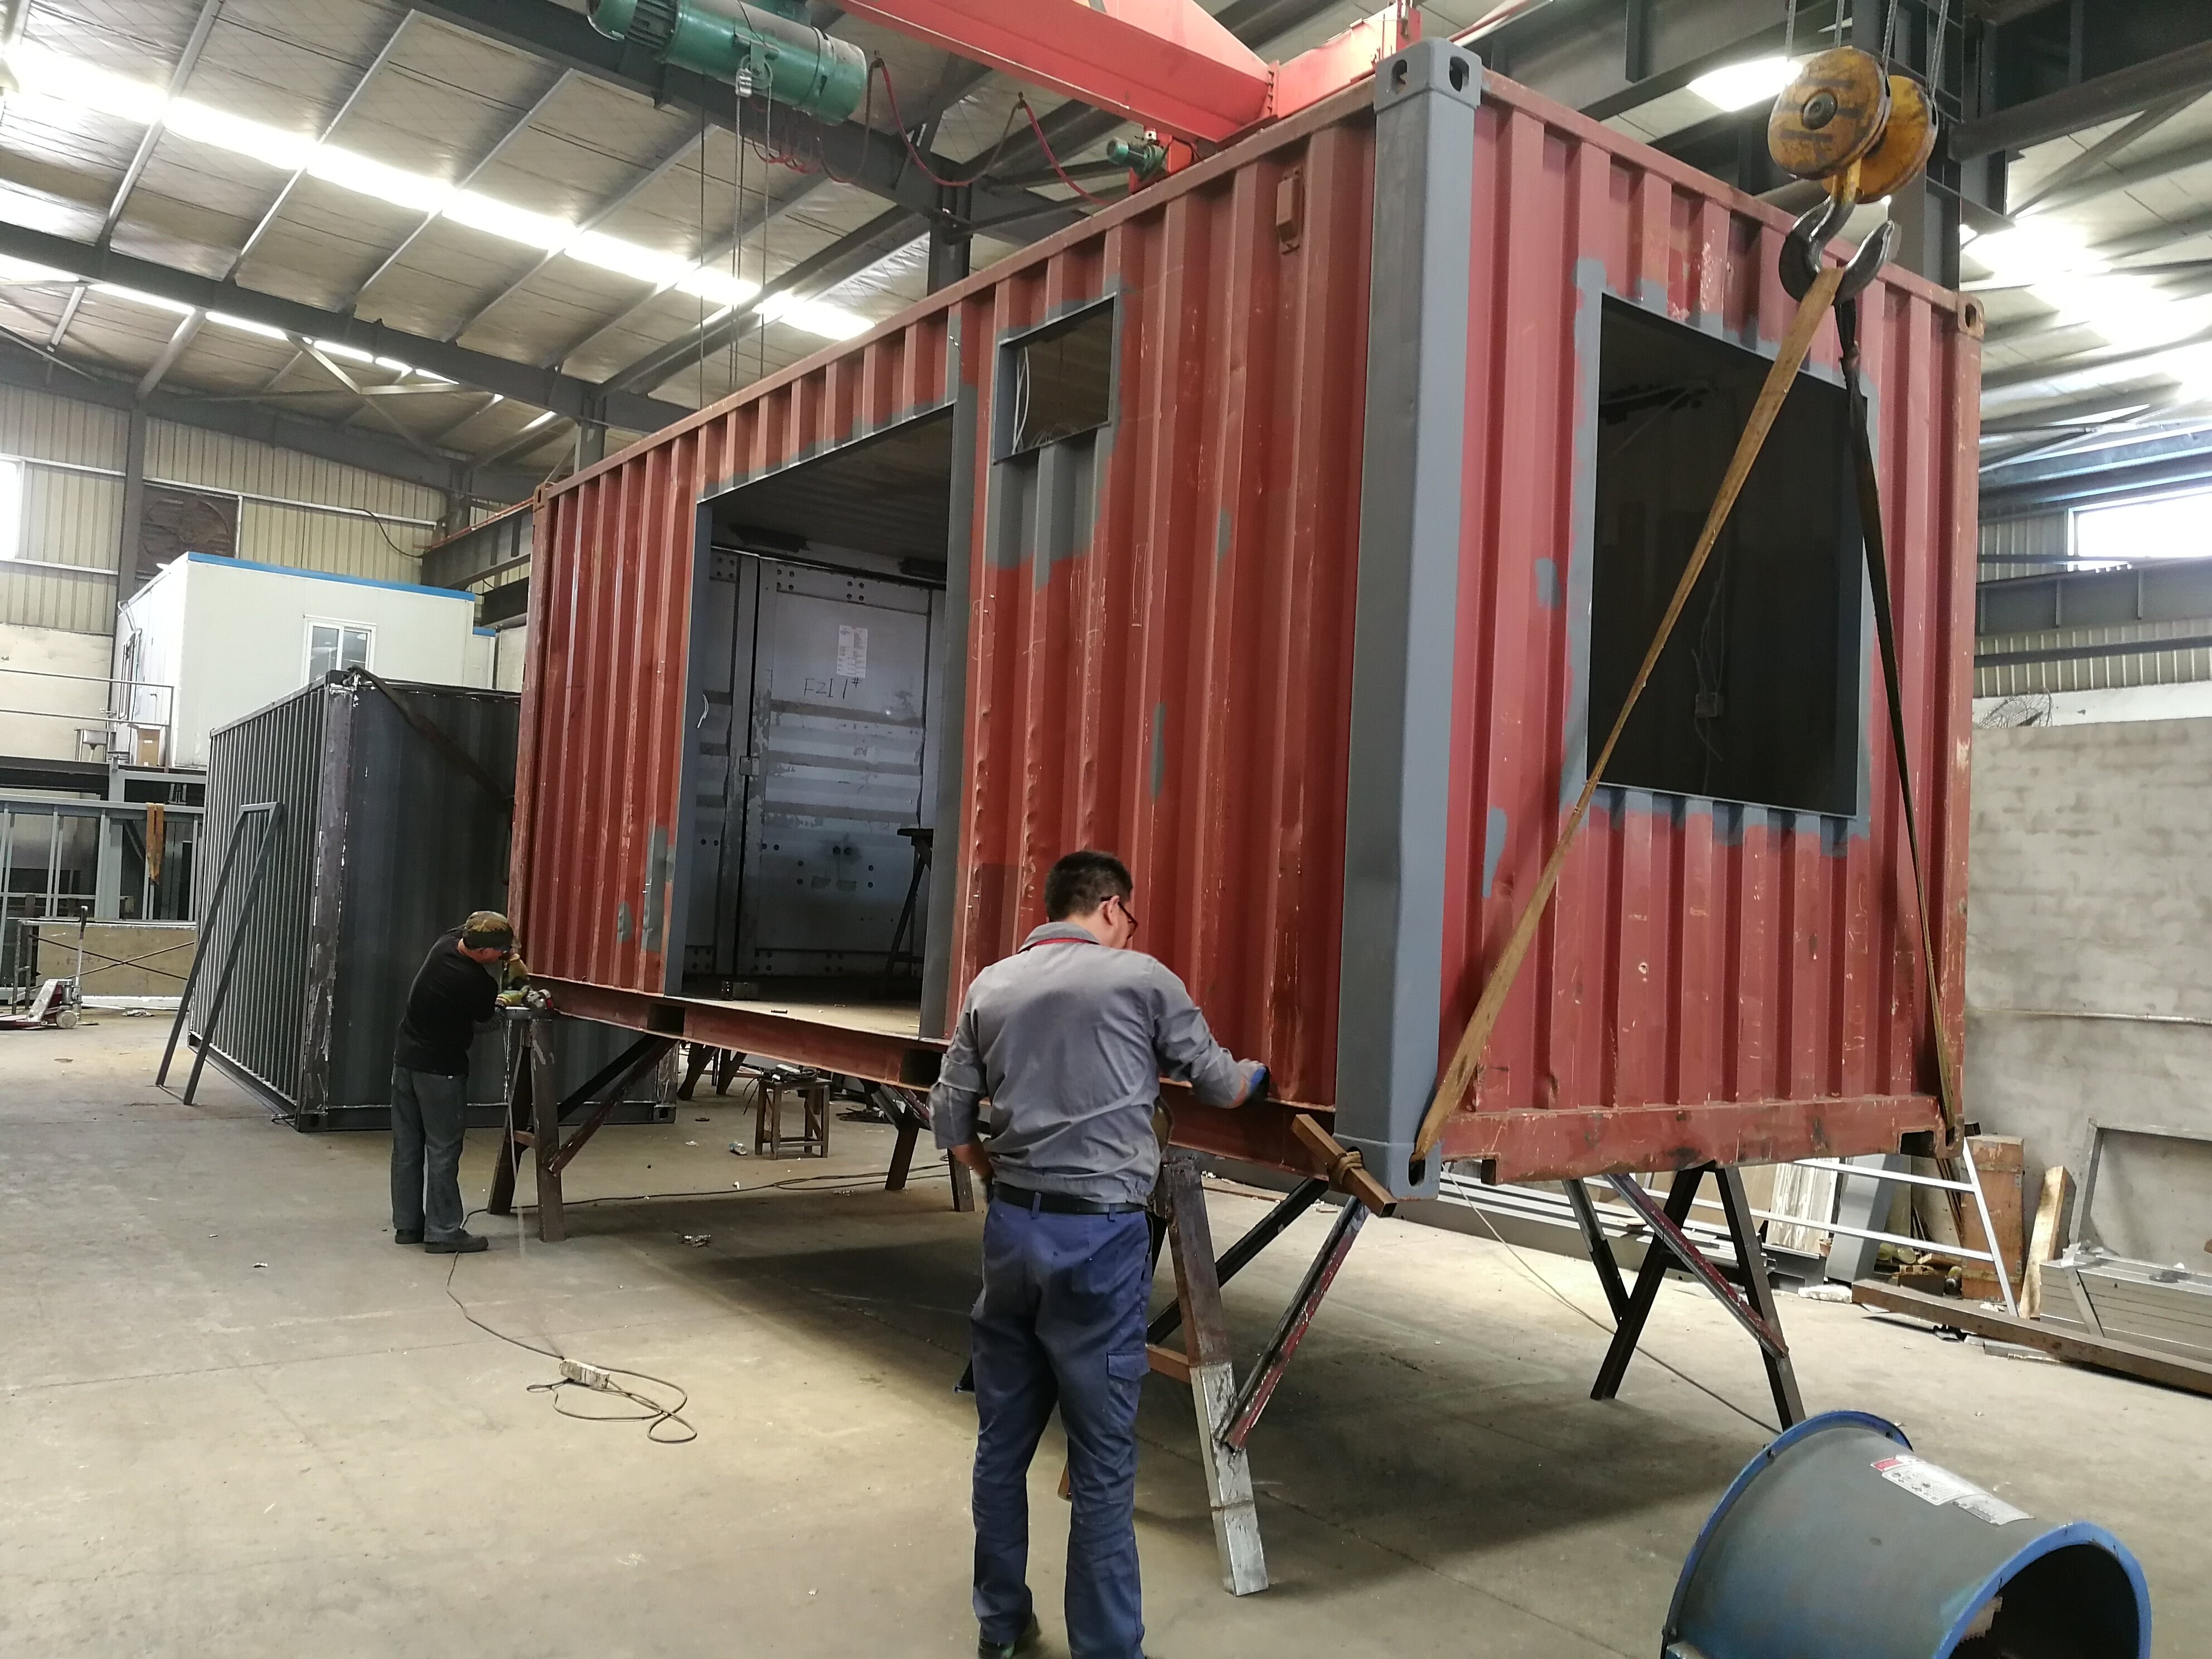 storage containers office supplies, container temporary accommodation manufacturer, container temporary accommodation factory, container temporary accommodation supplier, container temporary accommodation company